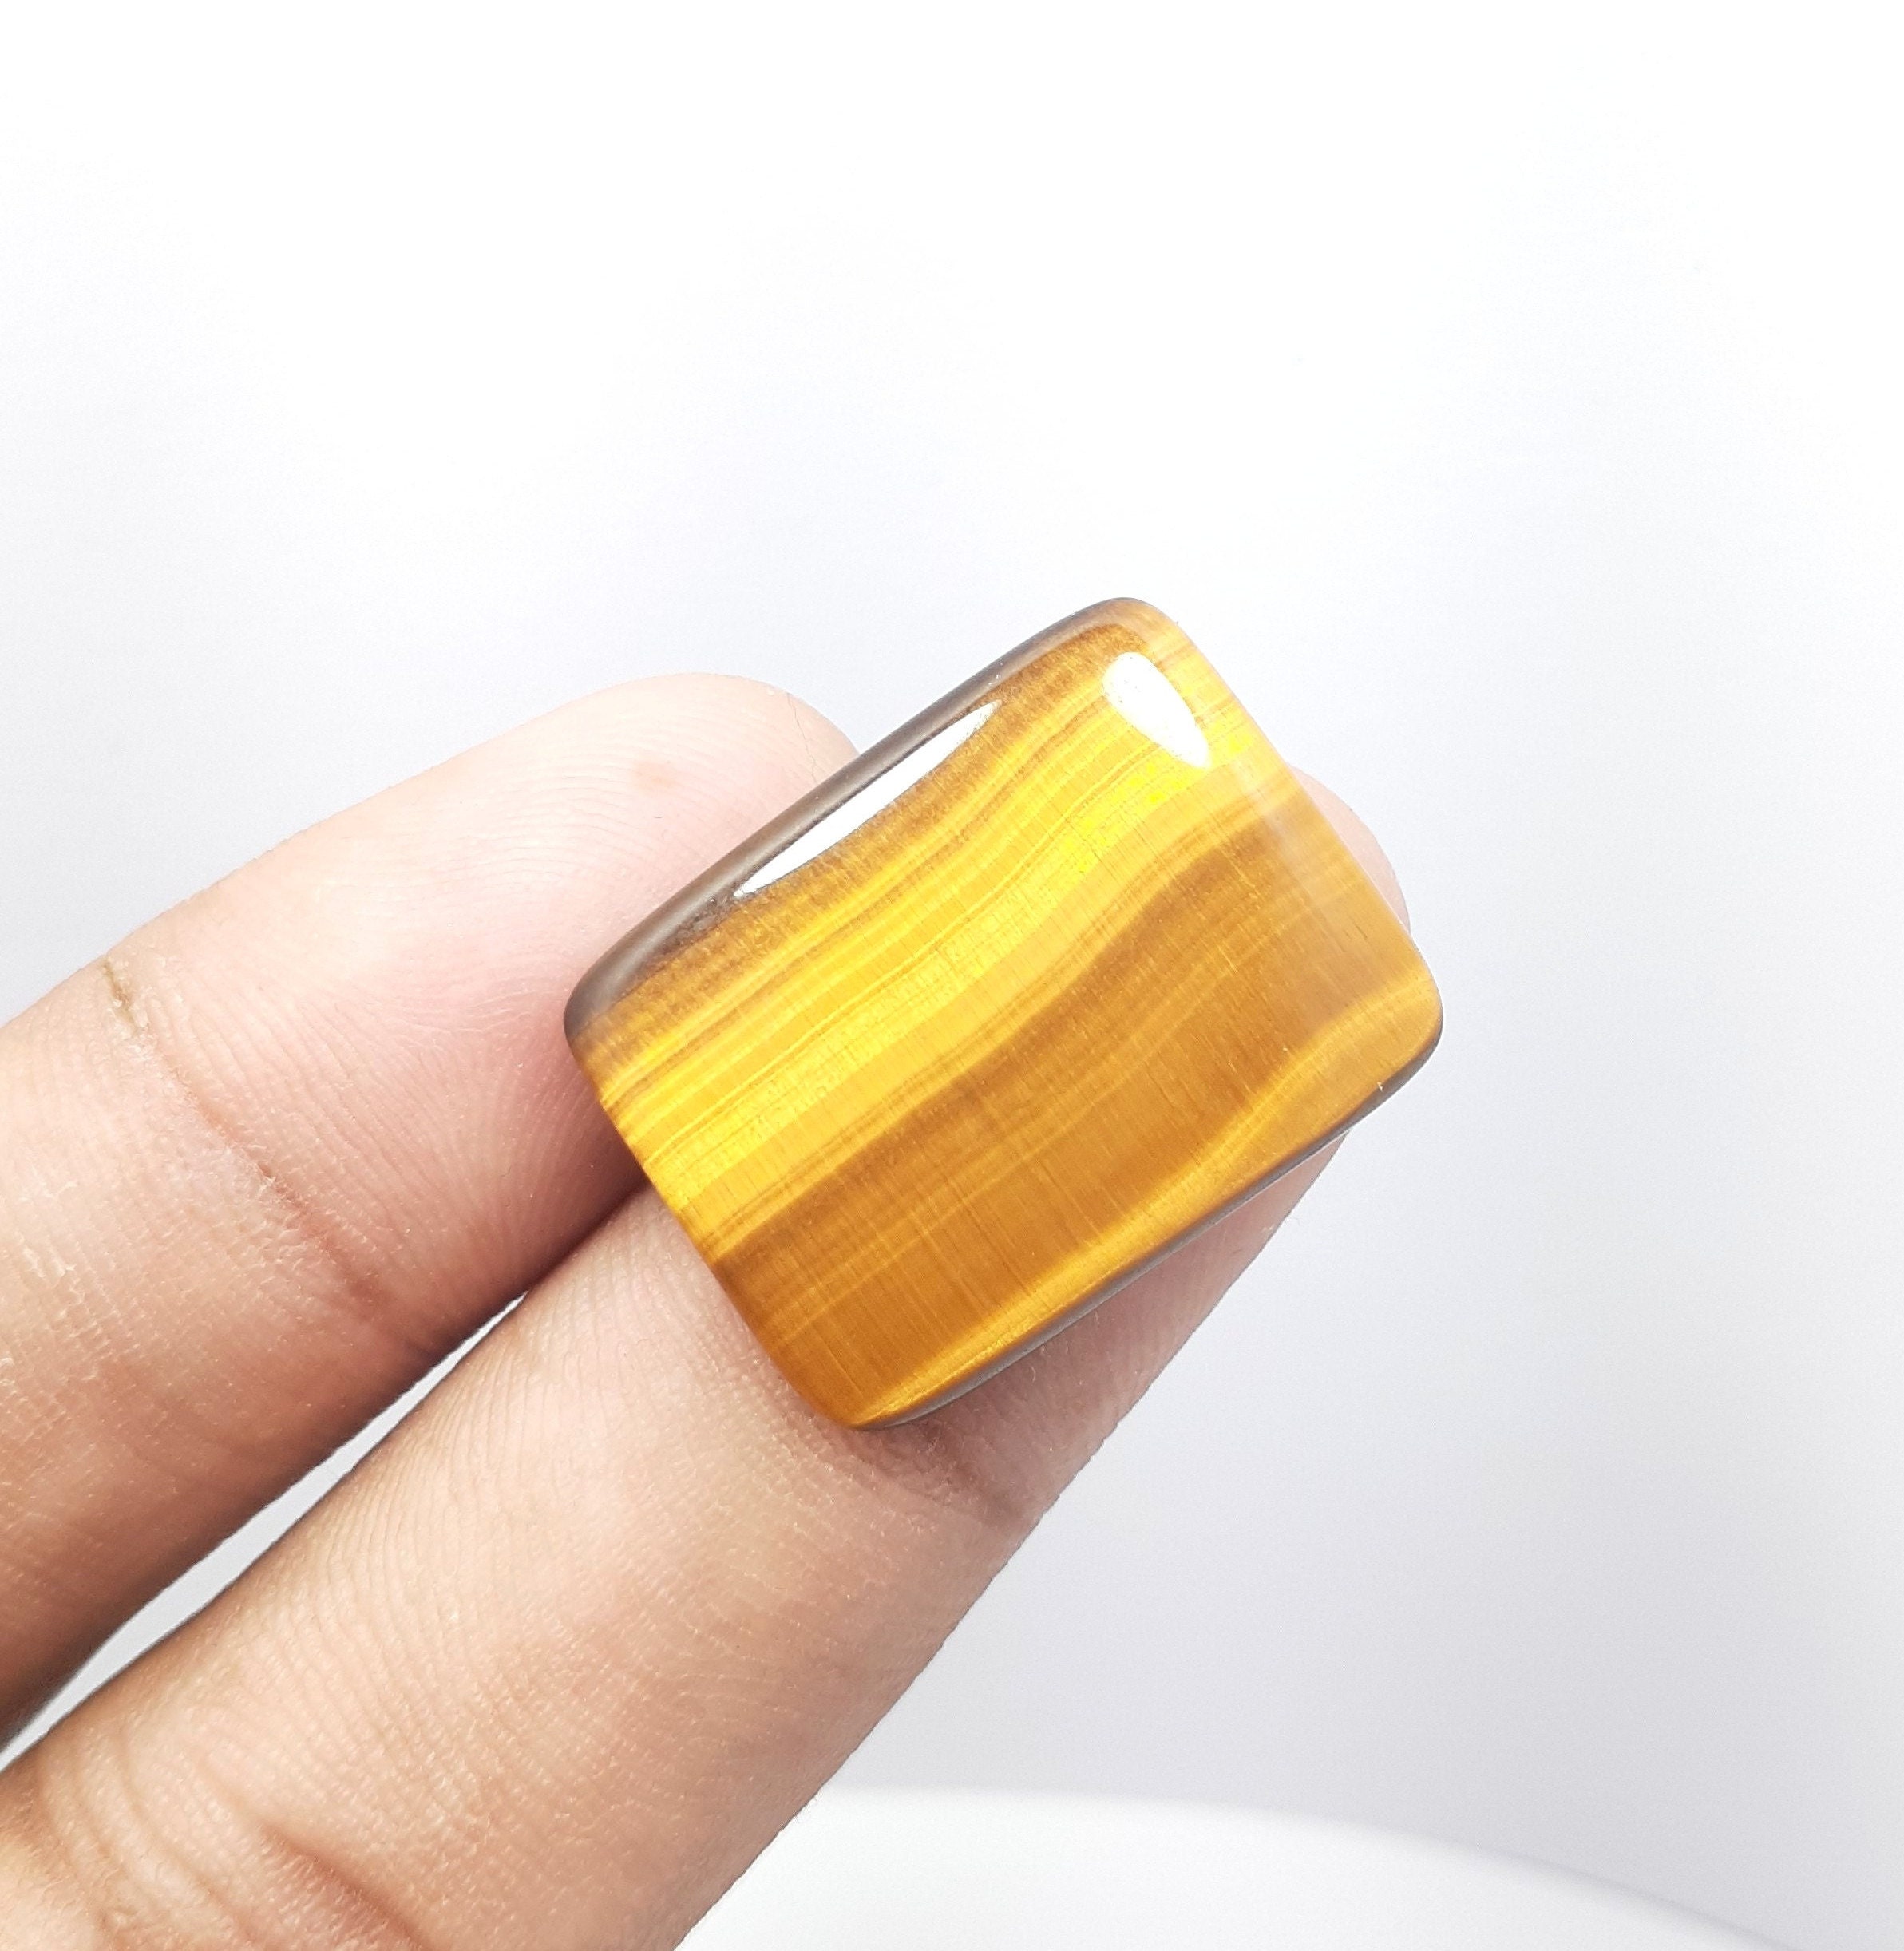 Amazing Golden Natural tiger eye cabochon Handmade polish shape rectangle loose gemstone for making jewelry size 23x18 mm weight 17 ct.